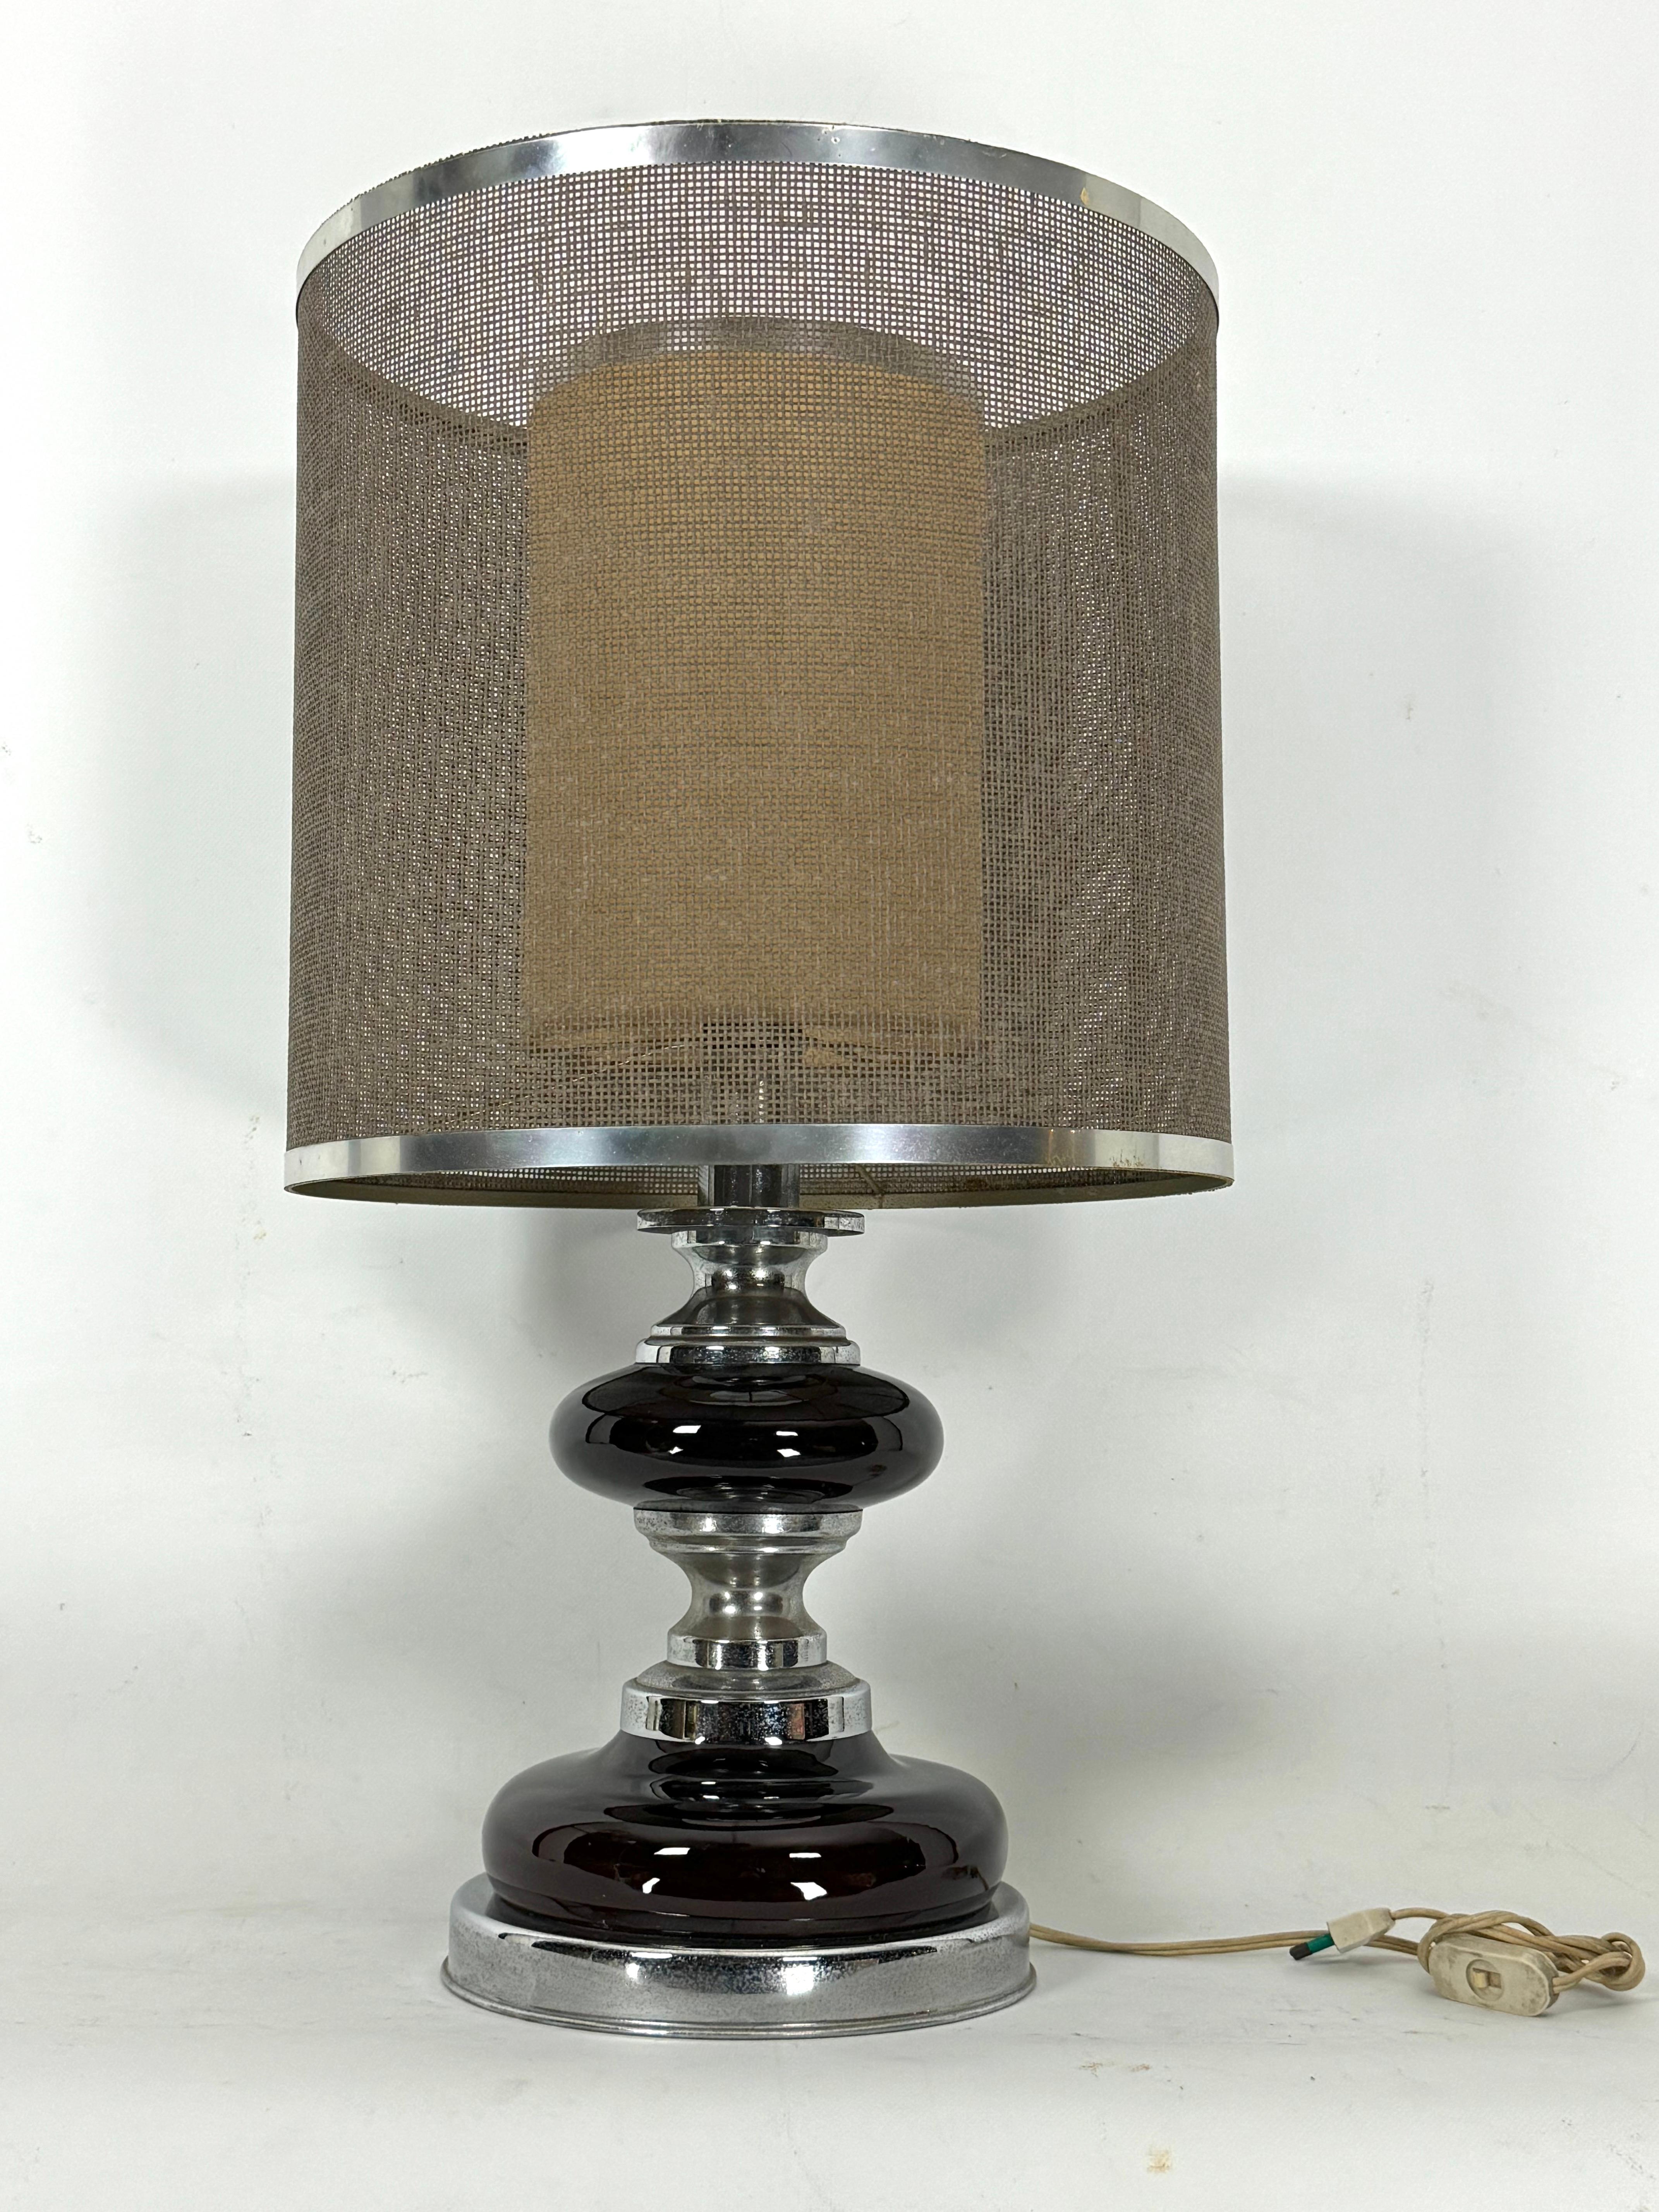 Good vintage condition with normal trace of age and use for this table lamp in chrome and lacquer with double lampshade. Produced in Italy during the 70s. Full working with EU standard, adaptable on demand for USA standard.
